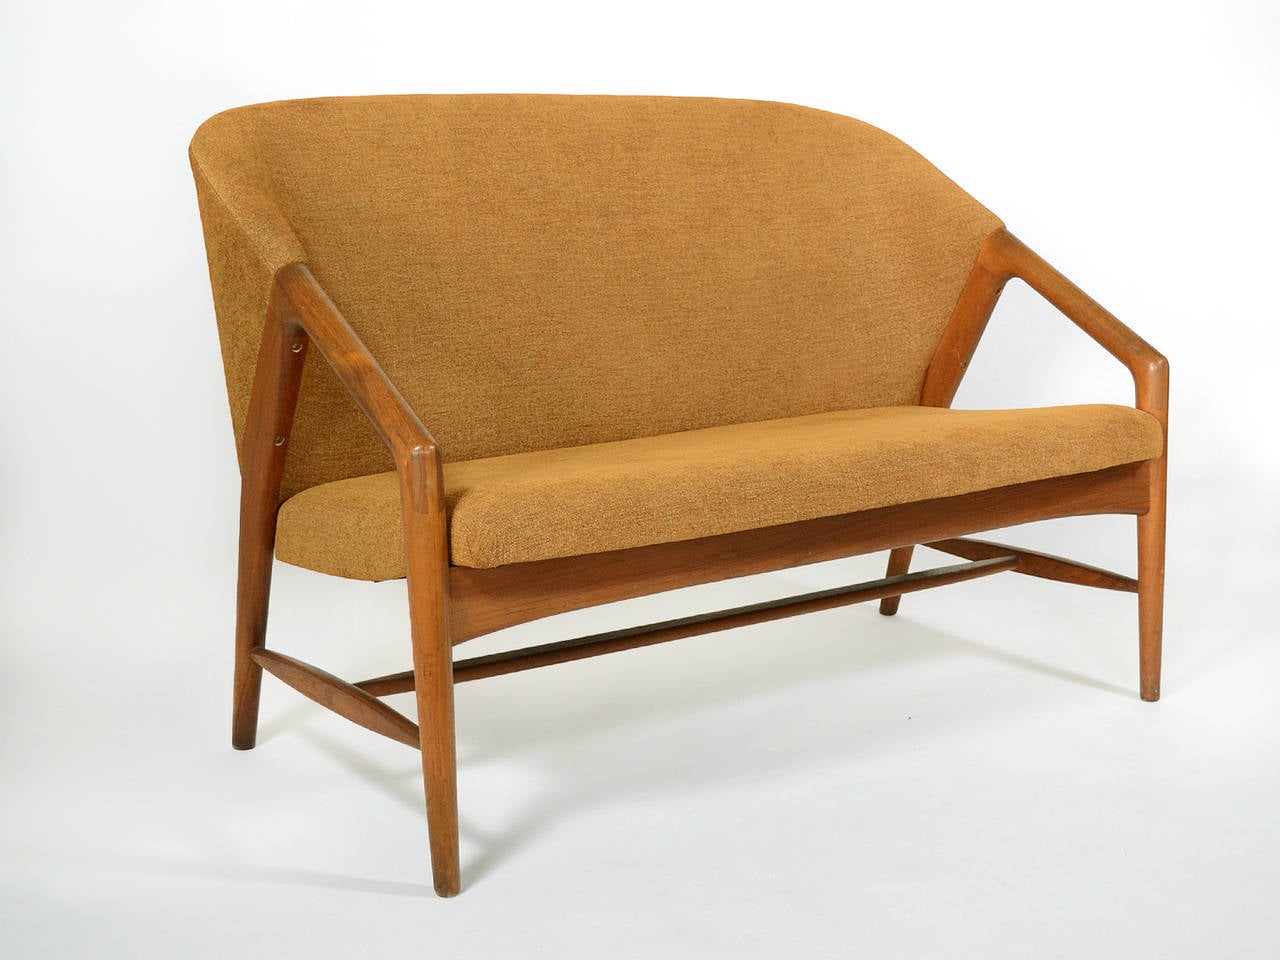 This beautiful Danish two-seat sofa with a teak frame and upholstered body is a beautiful design. It has several characteristics of designs by important Scandinavians. The manner in which the upholstered body is supported by the bearing frame